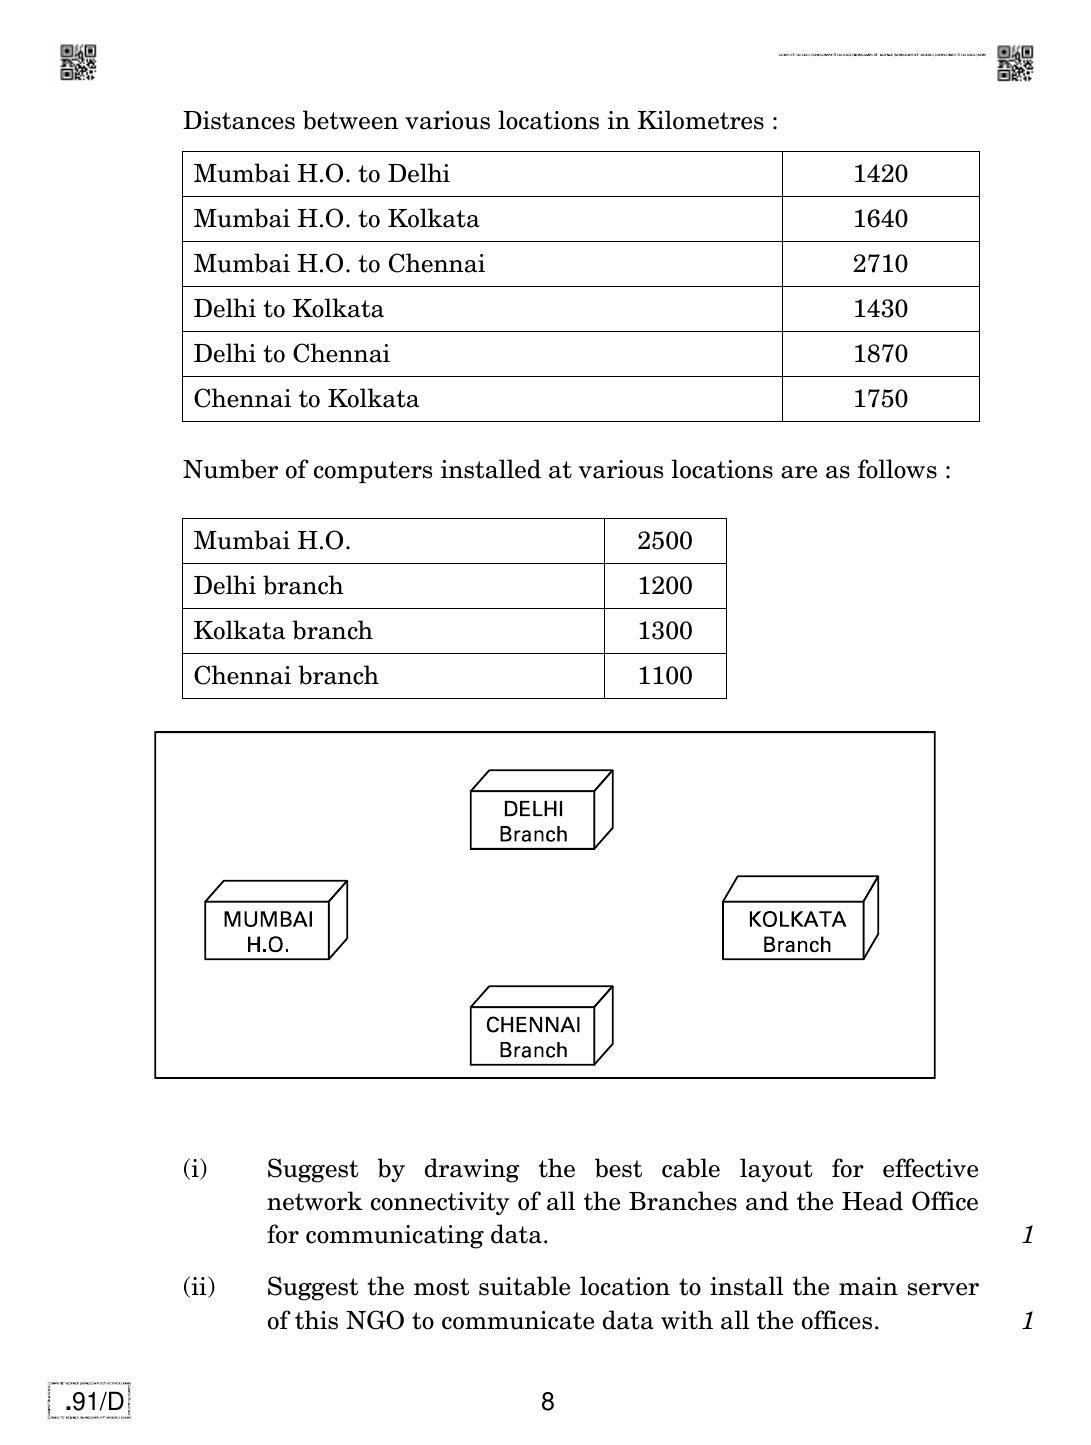 CBSE Class 12 CS 2020 Compartment Question Paper - Page 8